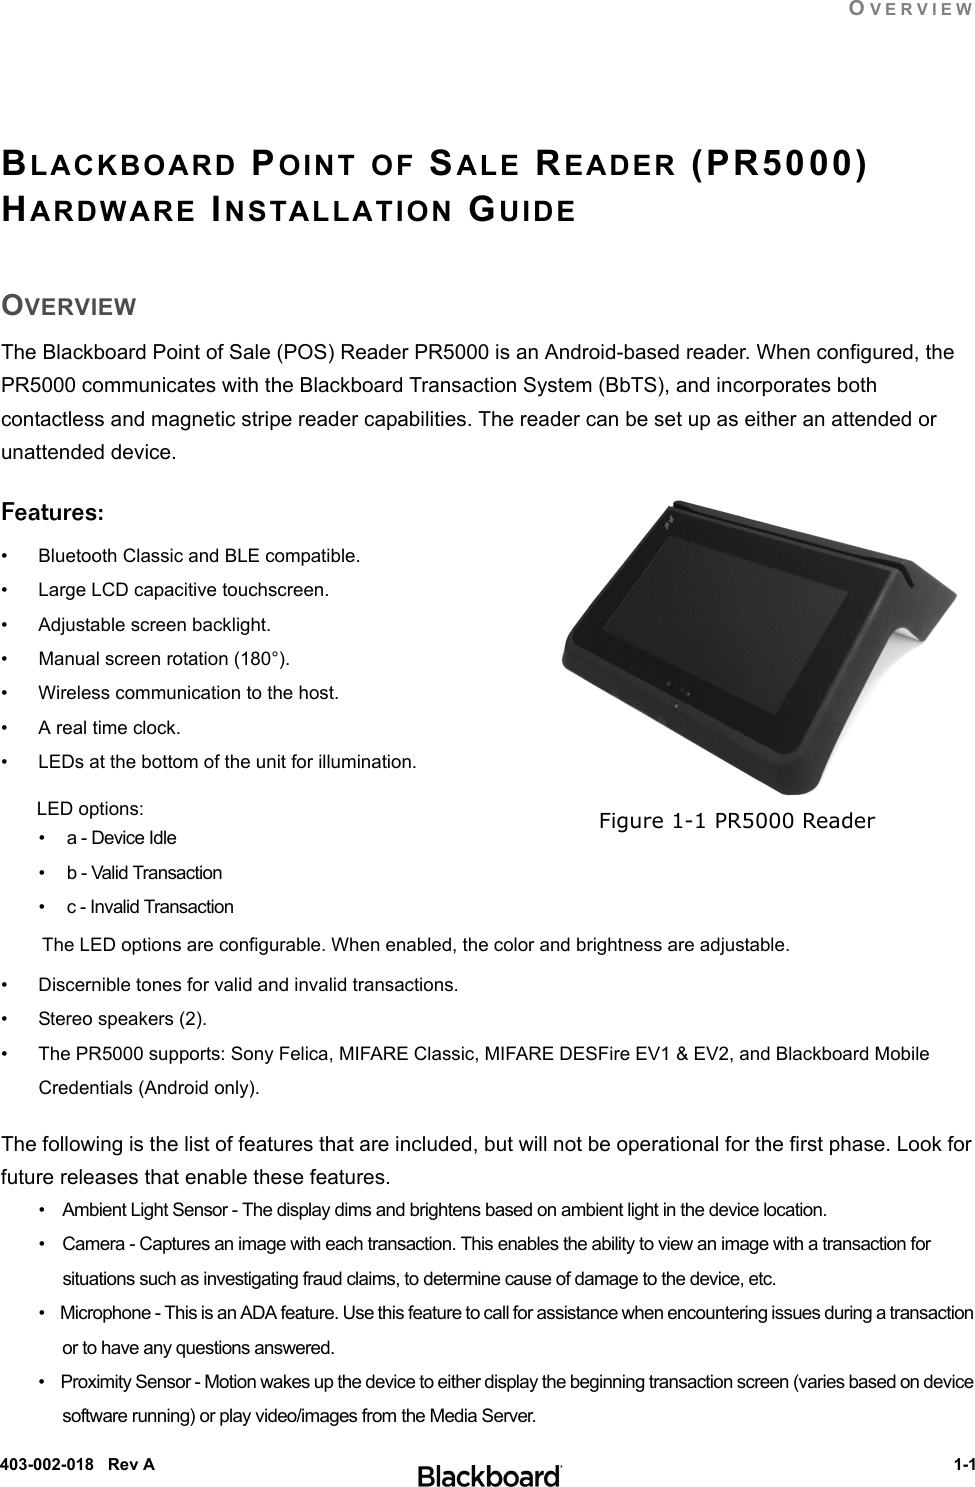 OVERVIEW 1-1403-002-018   Rev ABLACKBOARD POINT OF SALE READER (PR5000) HARDWARE INSTALLATION GUIDEOVERVIEWThe Blackboard Point of Sale (POS) Reader PR5000 is an Android-based reader. When configured, the PR5000 communicates with the Blackboard Transaction System (BbTS), and incorporates both contactless and magnetic stripe reader capabilities. The reader can be set up as either an attended or unattended device.Features:• Bluetooth Classic and BLE compatible.• Large LCD capacitive touchscreen.• Adjustable screen backlight.• Manual screen rotation (180°).• Wireless communication to the host.• A real time clock.• LEDs at the bottom of the unit for illumination. LED options:•     a - Device Idle•     b - Valid Transaction•     c - Invalid Transaction The LED options are configurable. When enabled, the color and brightness are adjustable.• Discernible tones for valid and invalid transactions.• Stereo speakers (2).• The PR5000 supports: Sony Felica, MIFARE Classic, MIFARE DESFire EV1 &amp; EV2, and Blackboard Mobile Credentials (Android only).The following is the list of features that are included, but will not be operational for the first phase. Look for future releases that enable these features.•    Ambient Light Sensor - The display dims and brightens based on ambient light in the device location.•    Camera - Captures an image with each transaction. This enables the ability to view an image with a transaction for situations such as investigating fraud claims, to determine cause of damage to the device, etc.•    Microphone - This is an ADA feature. Use this feature to call for assistance when encountering issues during a transaction or to have any questions answered.•    Proximity Sensor - Motion wakes up the device to either display the beginning transaction screen (varies based on device software running) or play video/images from the Media Server.Figure 1-1 PR5000 Reader